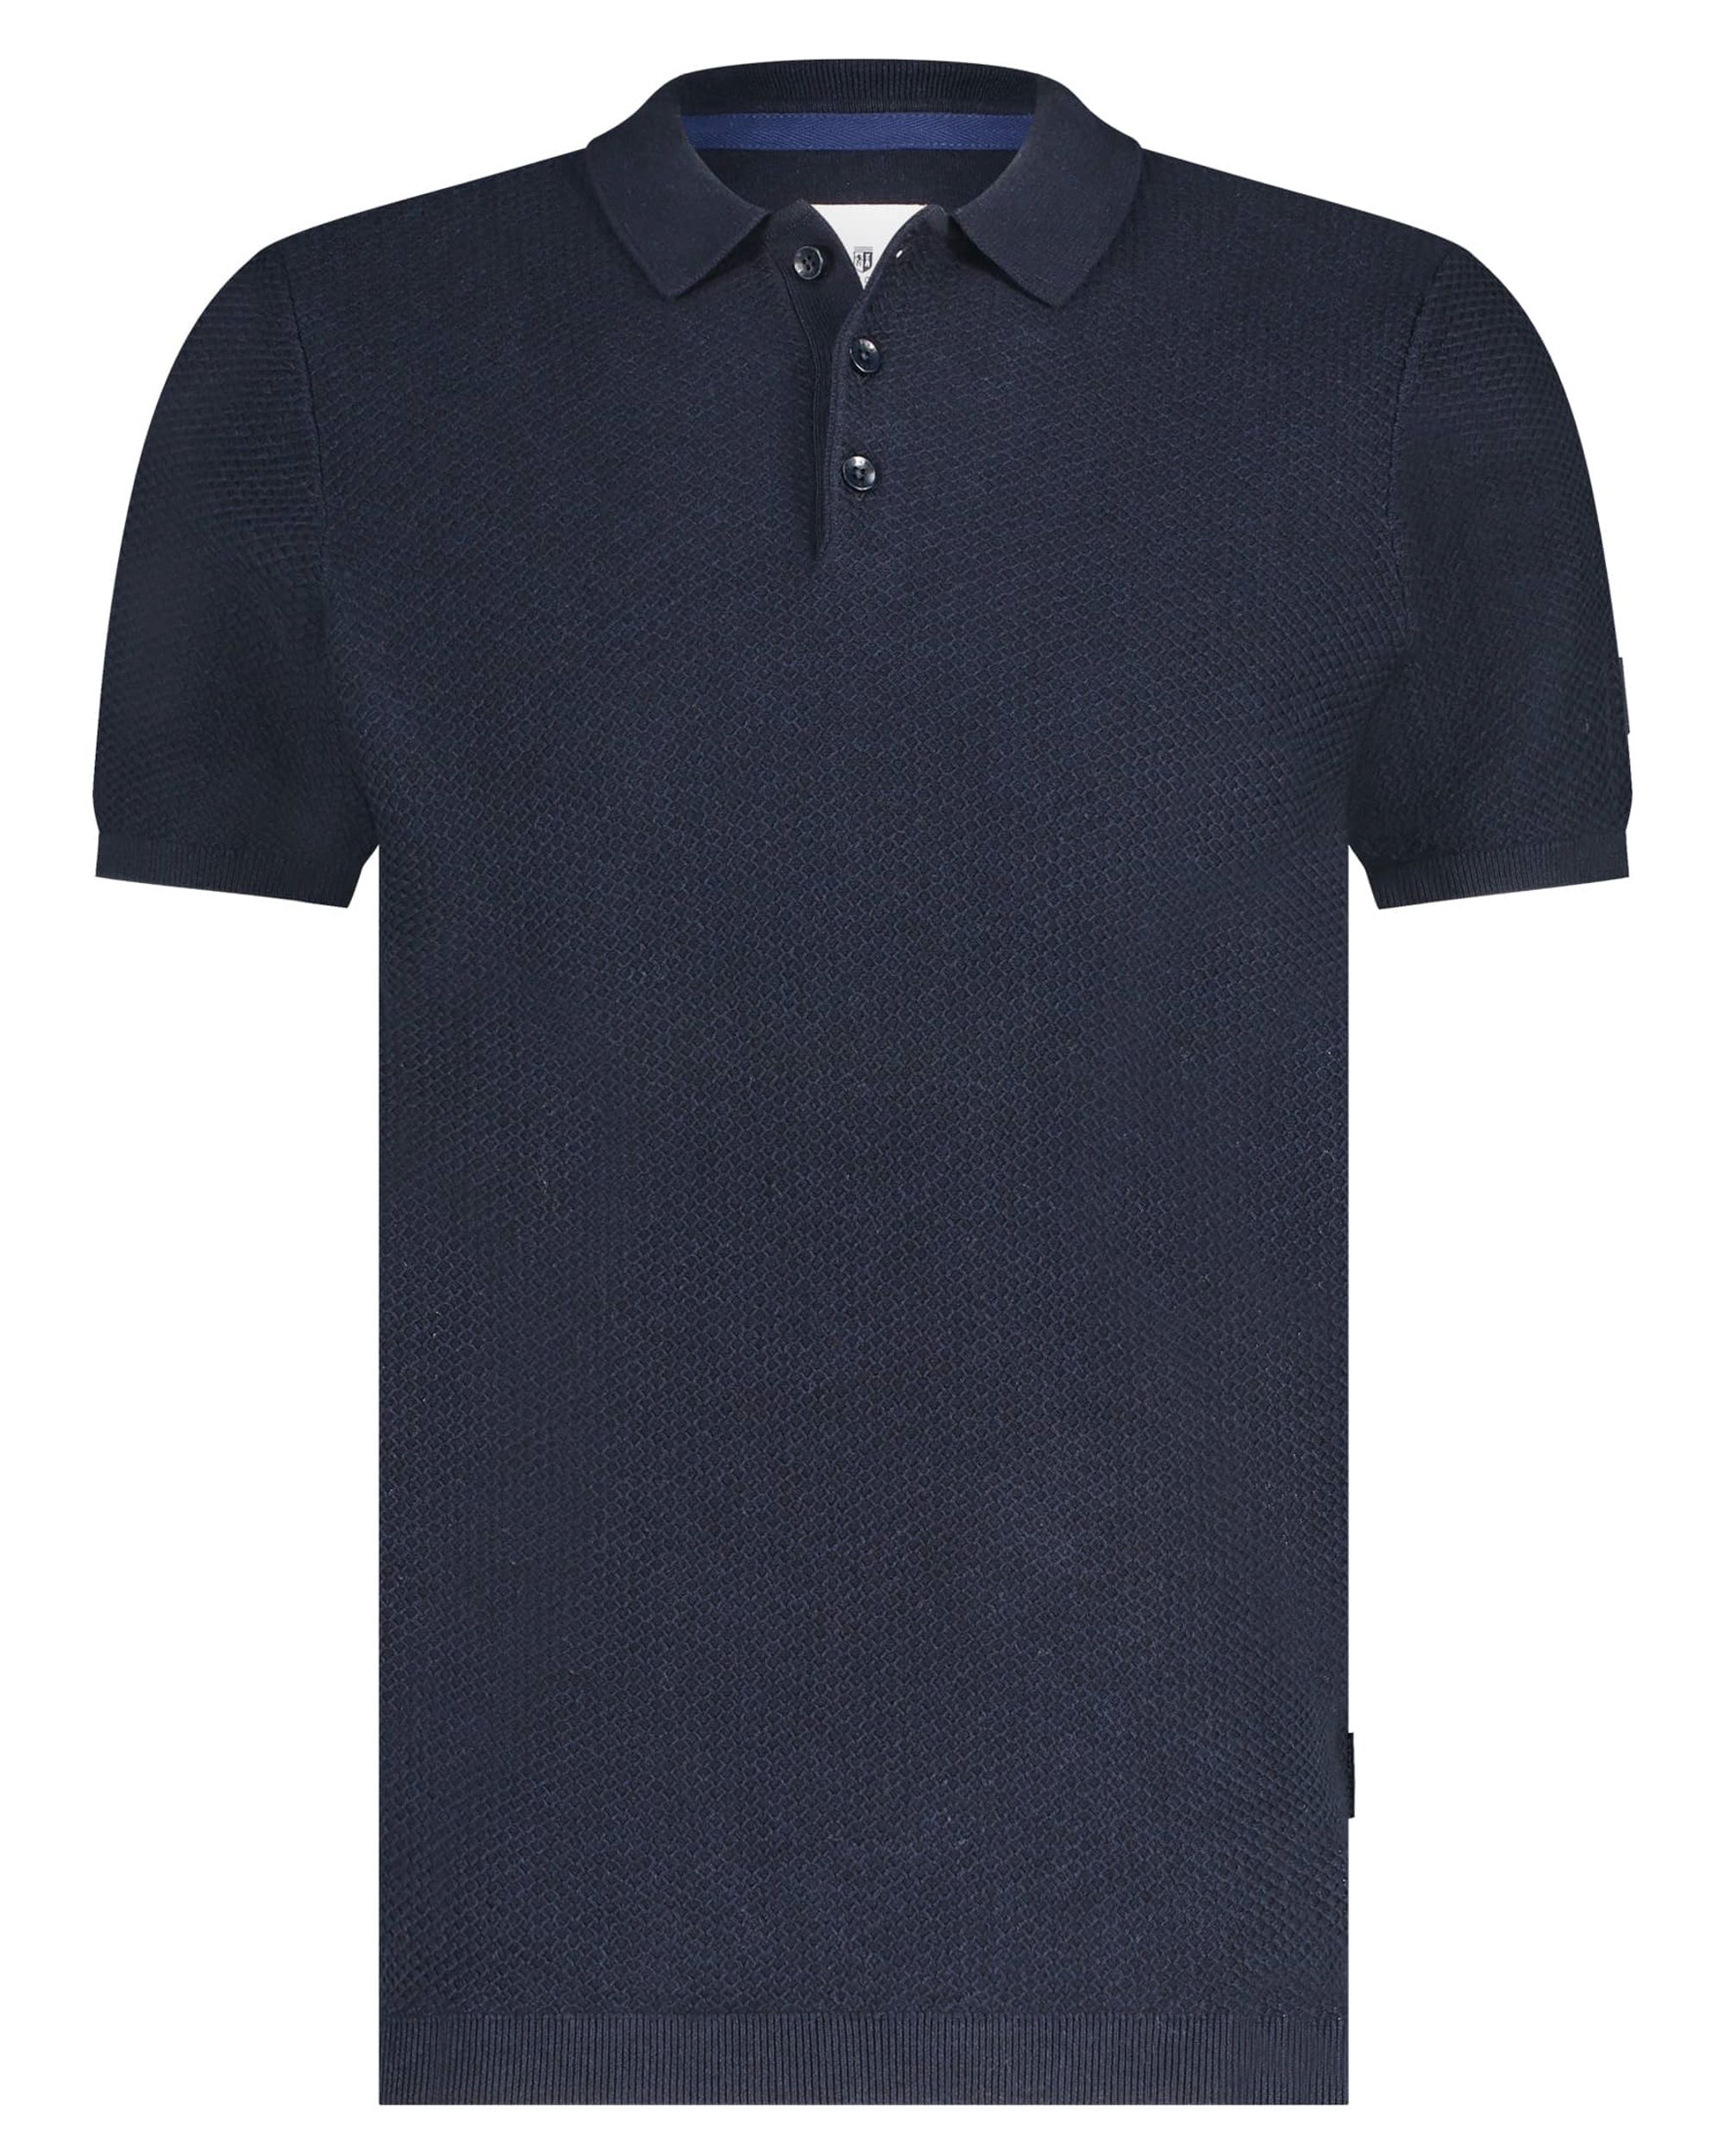 State of Art Polo KM Donker blauw 093394-001-4XL